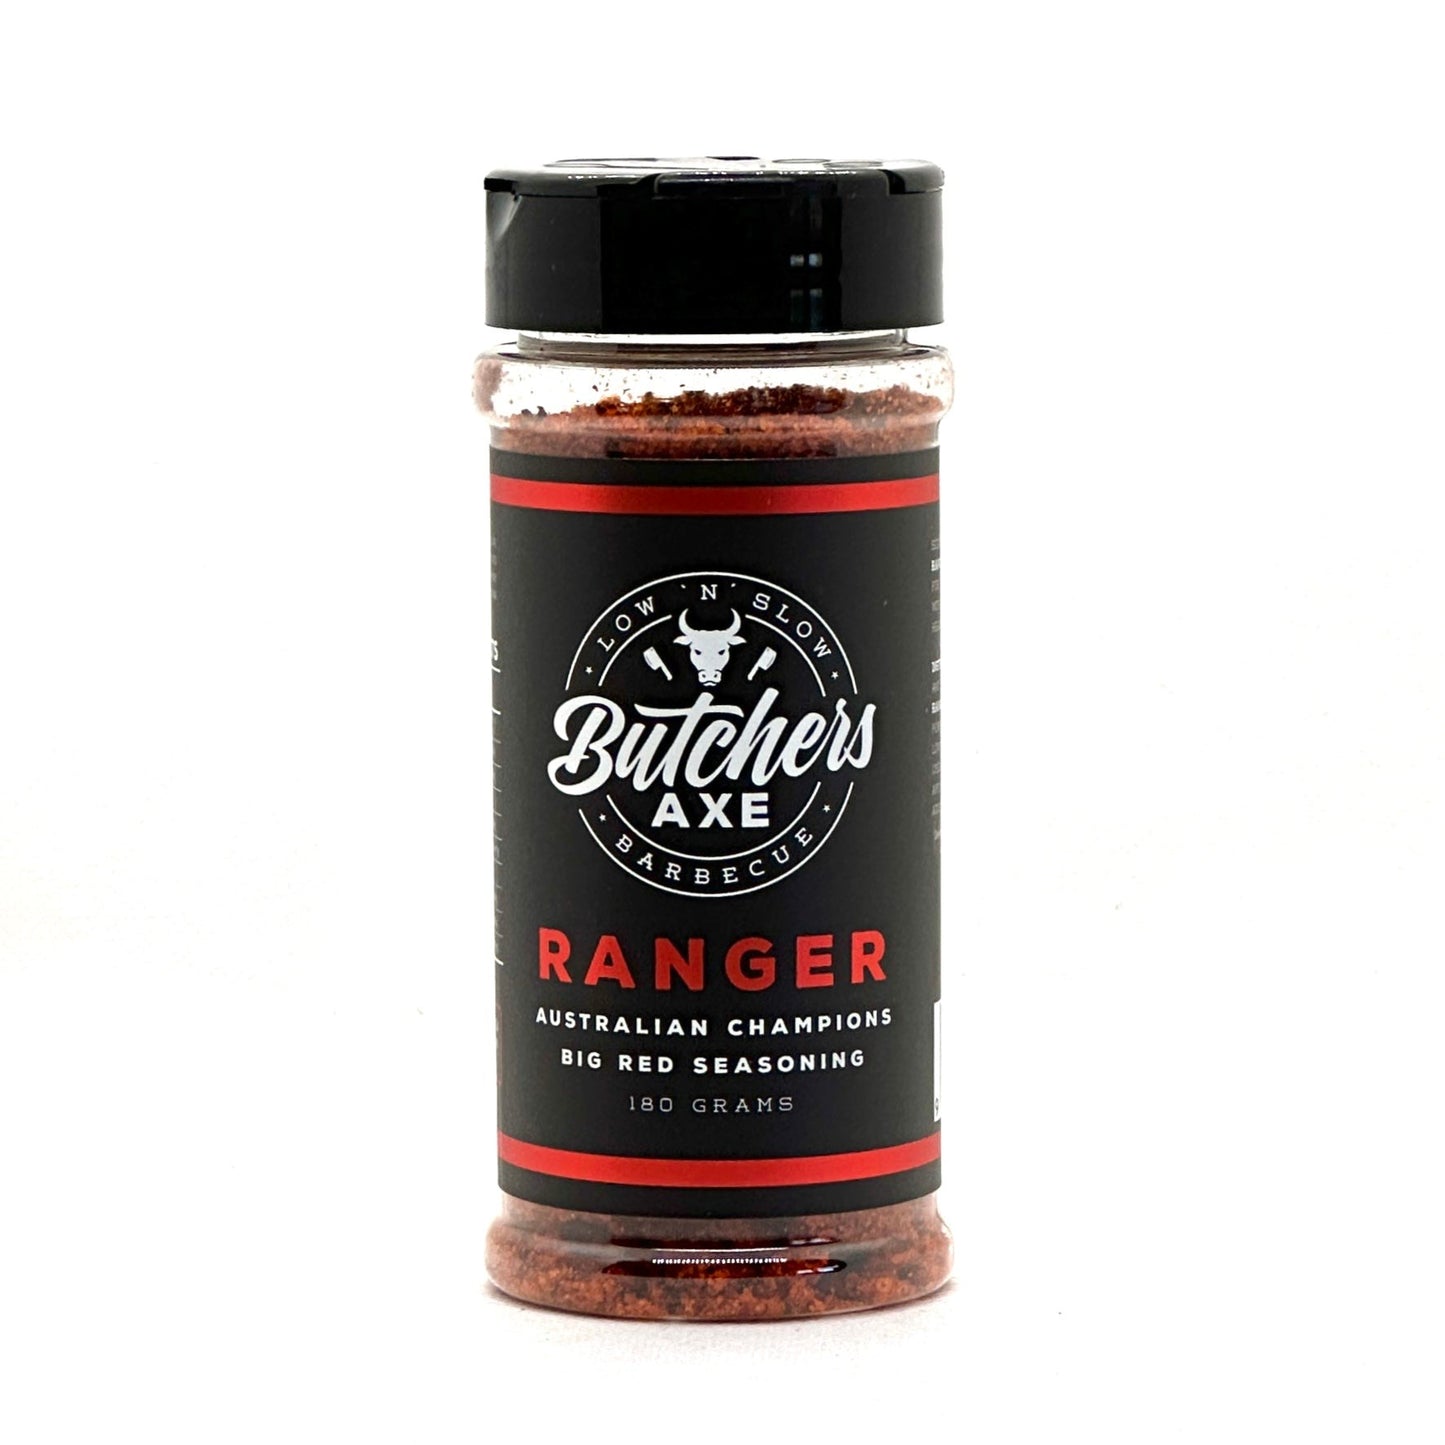 High-resolution image showcasing the vibrant packaging of Butcher's Axe Ranger Seasoning against a clean background.